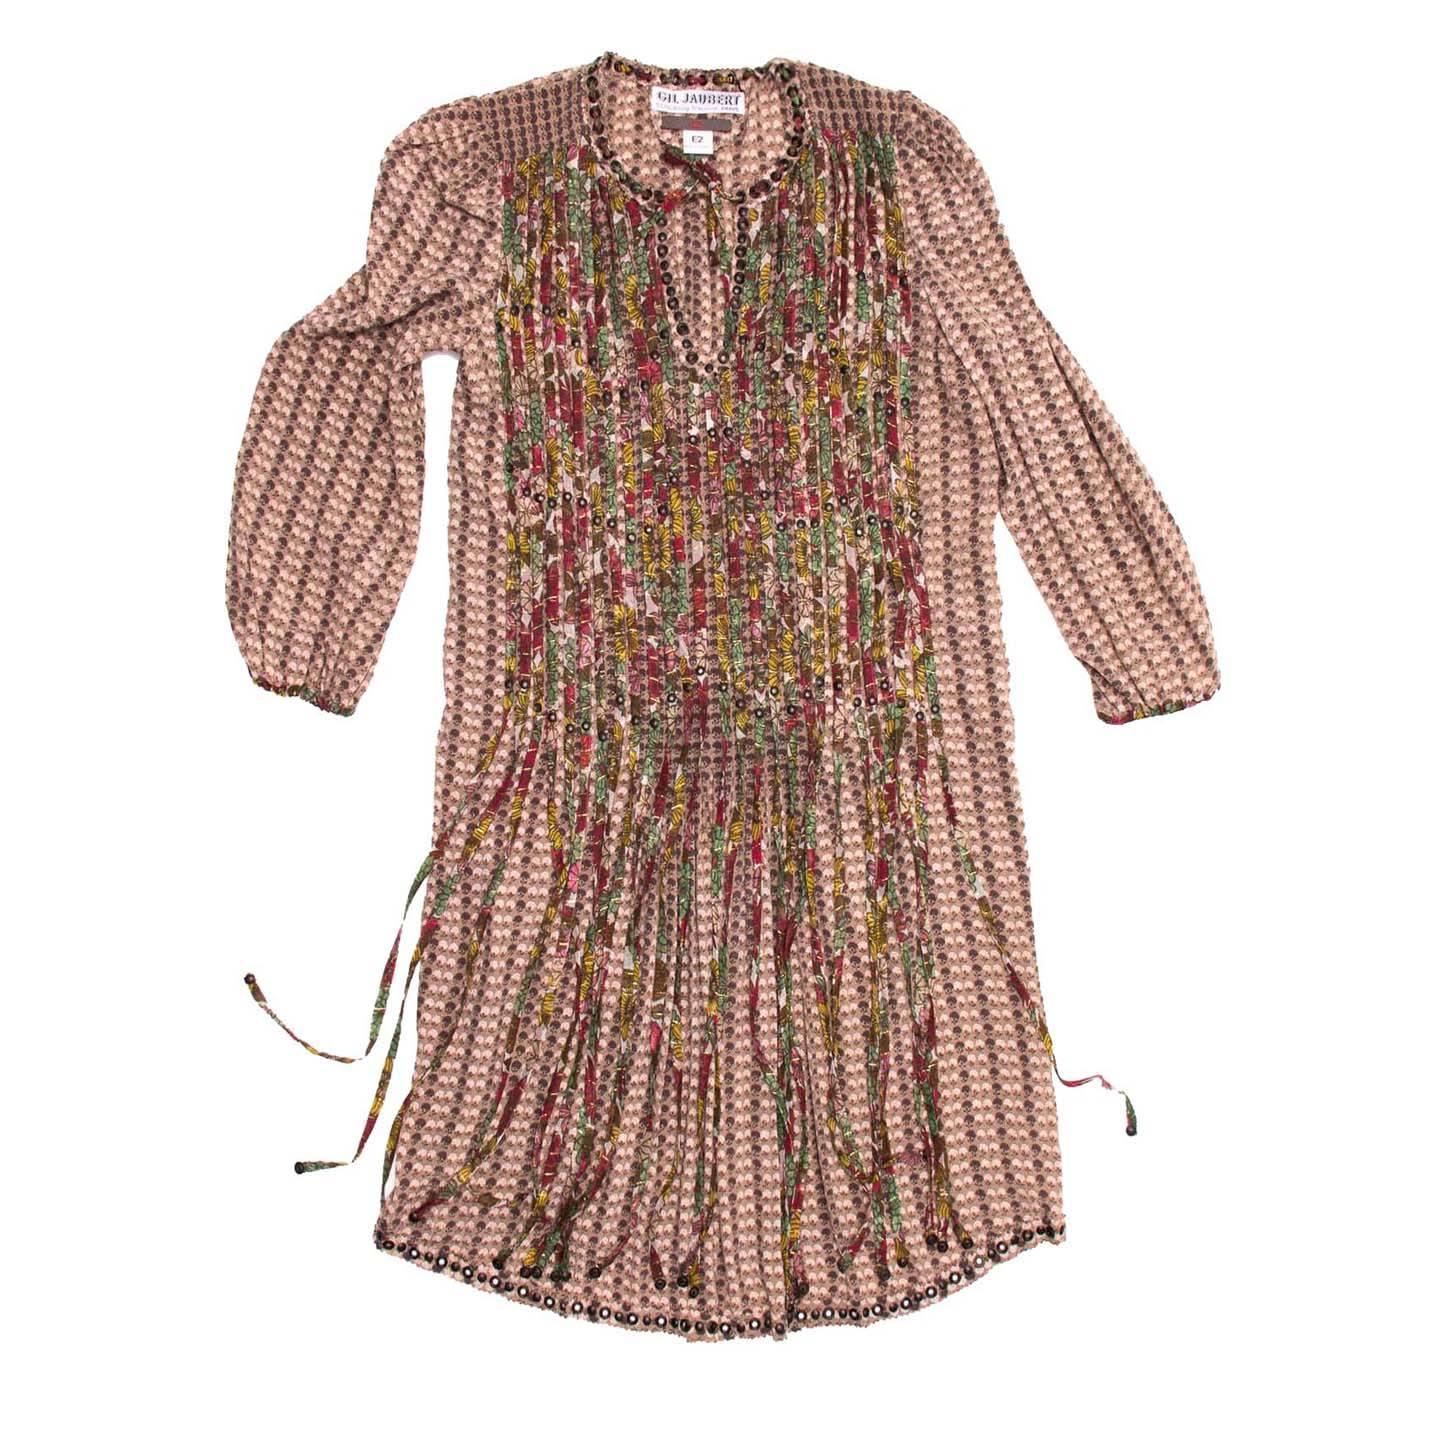 Lovely Bohemian style dress in a small floral printed silk. Long sleeves with gathered cap sleeves and elasticized printed binding at cuffs. Small nailheads around neckline, front, and bottom hem. Contrast printed vertical strips from yoke area